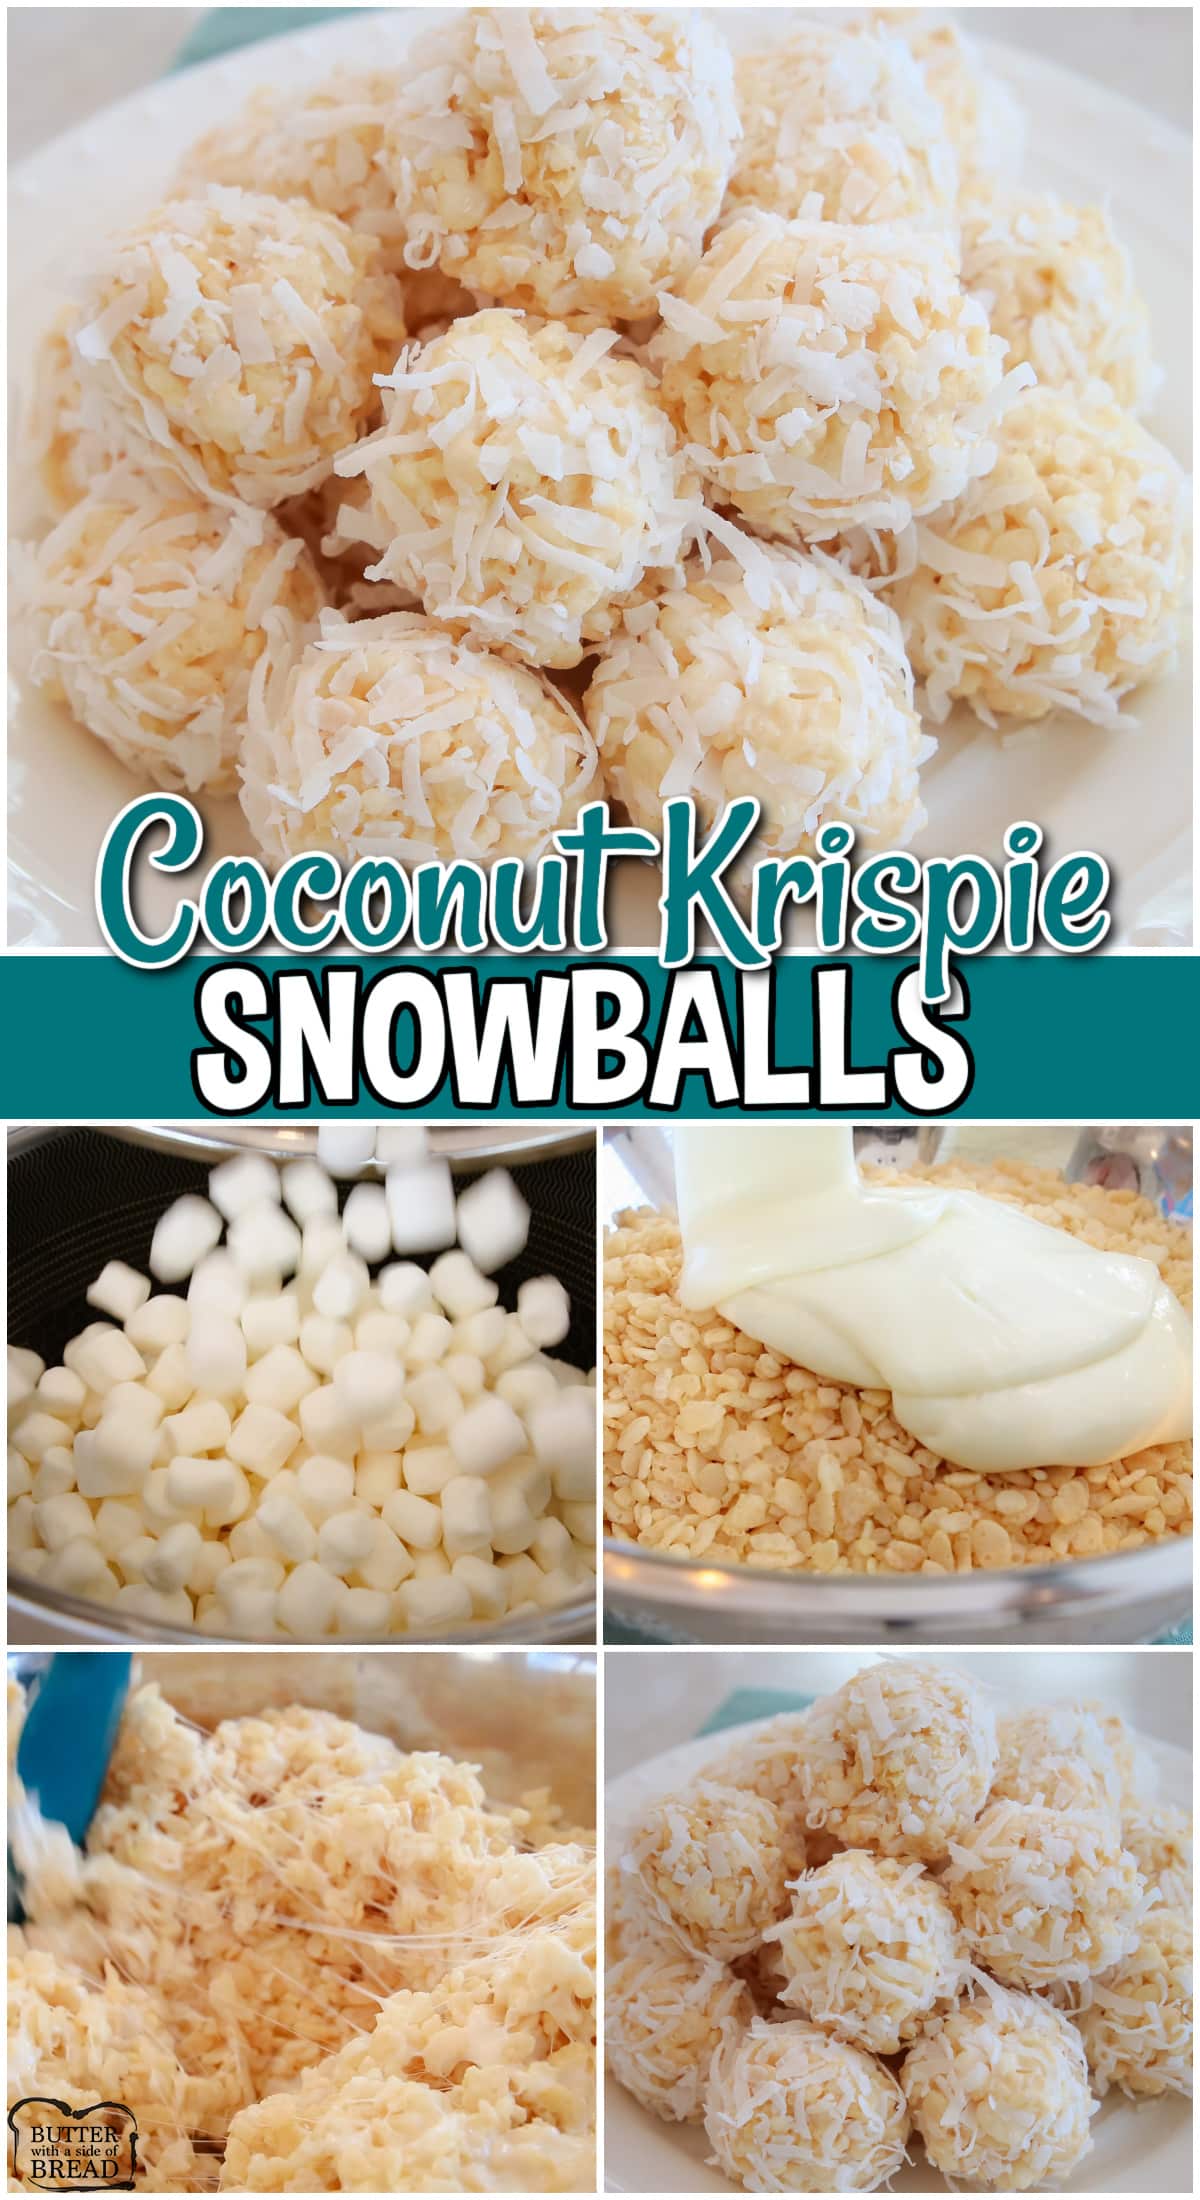 Rice Krispie Coconut Snowballs are delightful take on traditional krispie treats that combines the sweet and crunchy flavors of Rice Krispie cereal with the tropical taste of coconut!